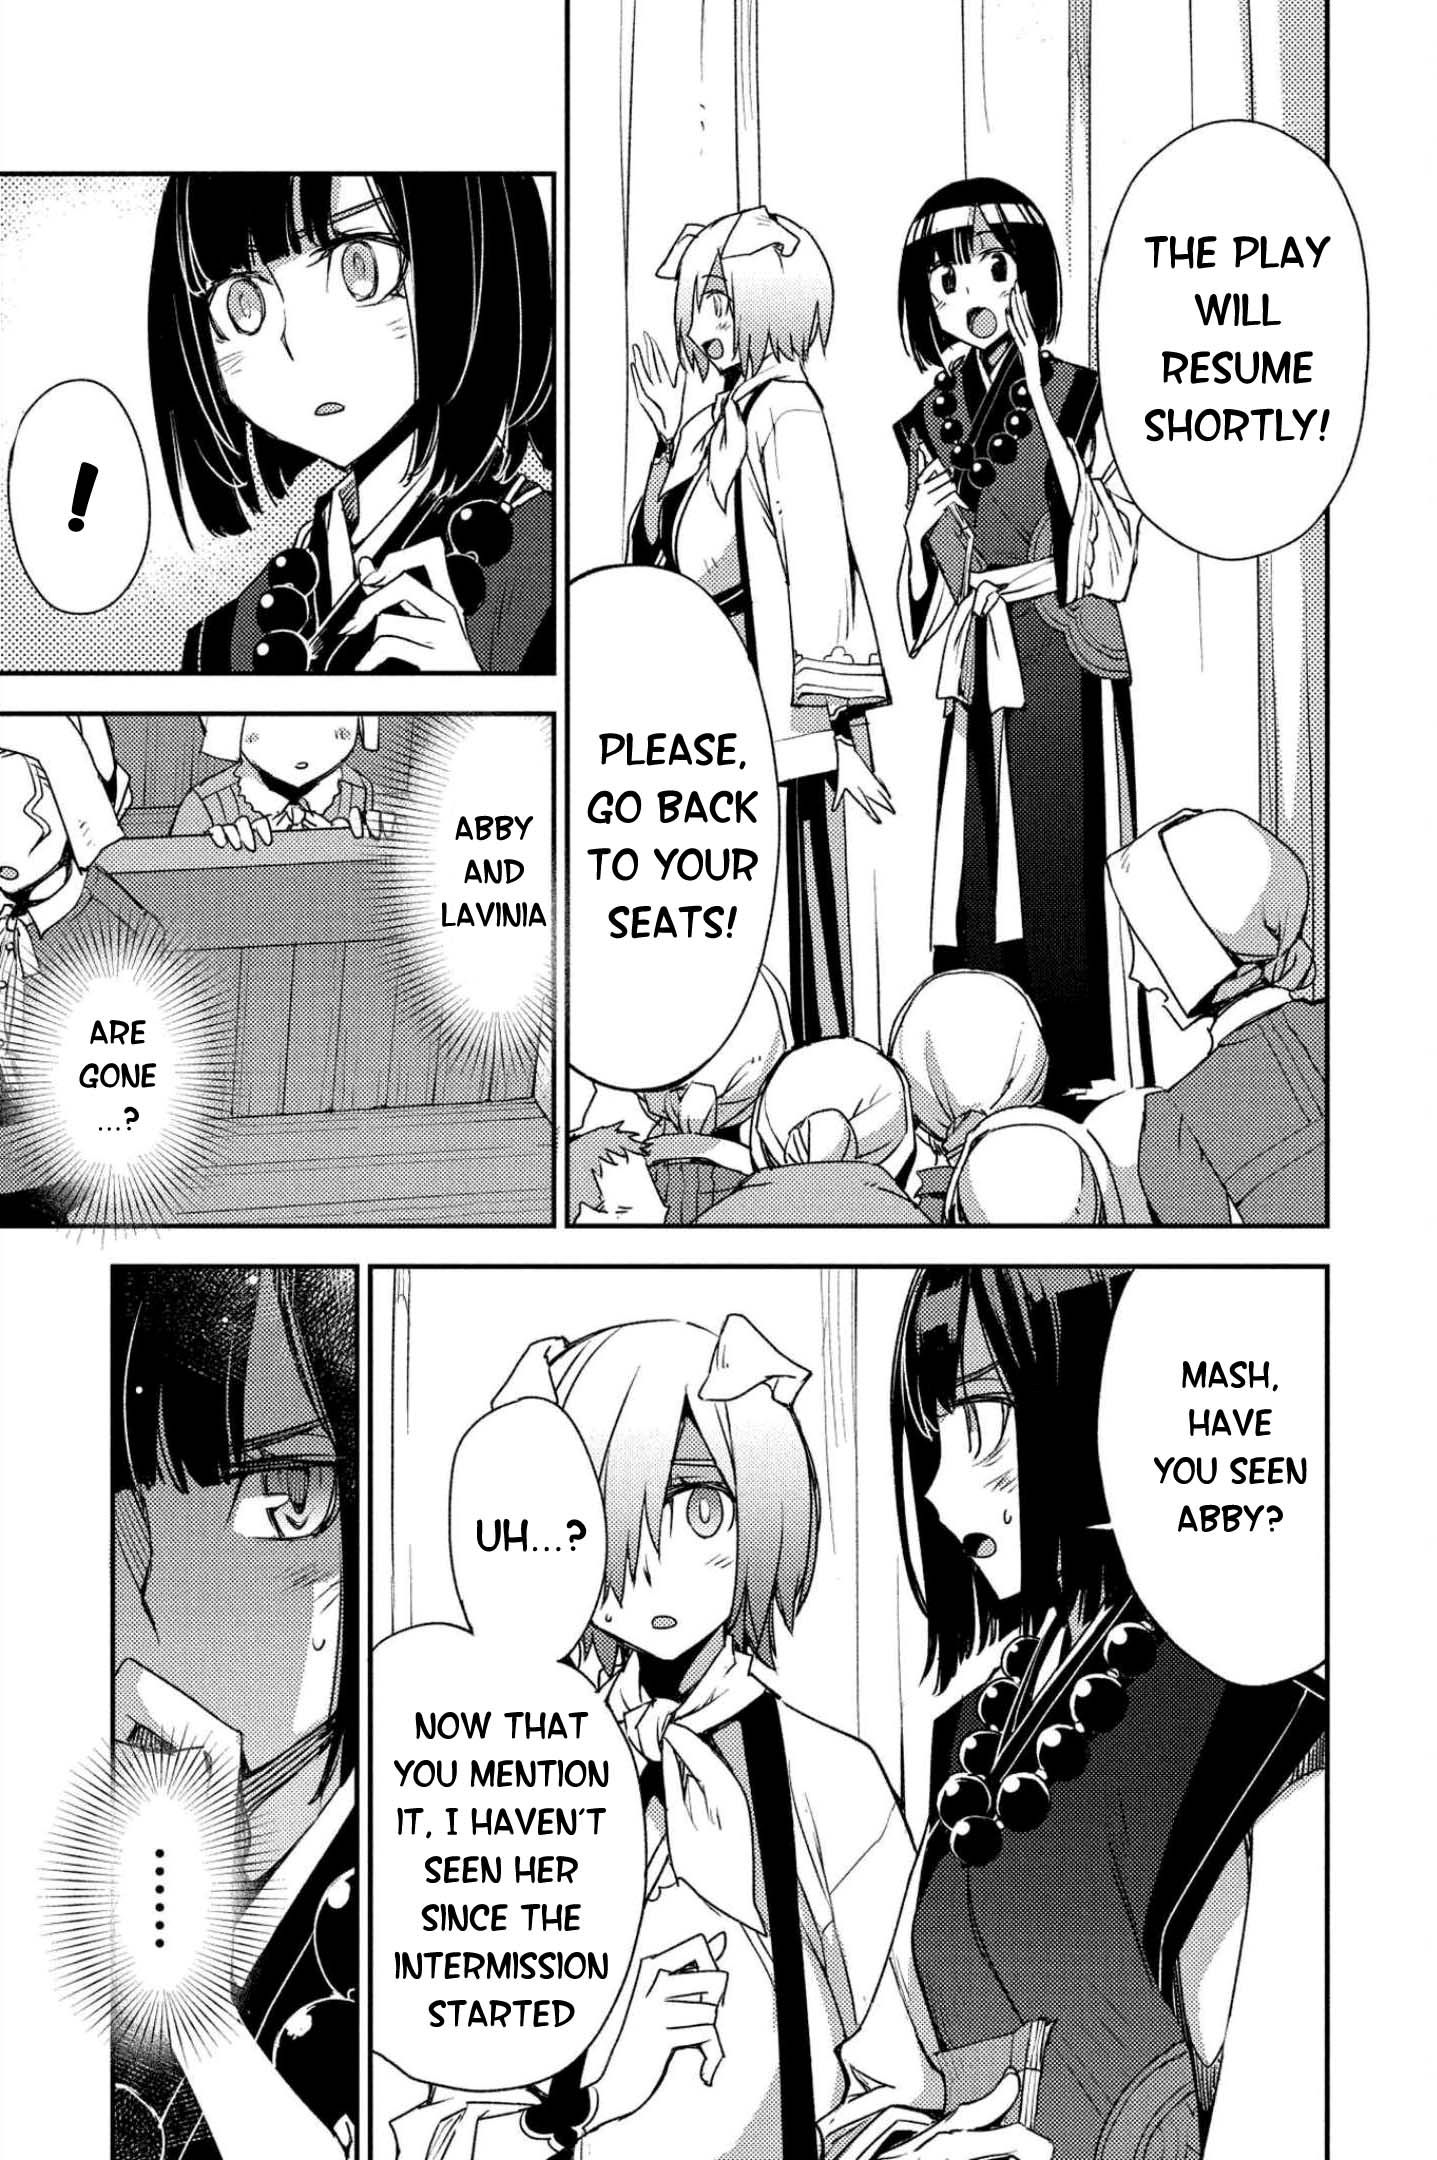 Fate/grand Order: Epic Of Remnant: Pseudo-Singularity Iv: The Forbidden Advent Garden, Salem - Heretical Salem Vol.4 Chapter 23: The Second Knot - 4 - Picture 3